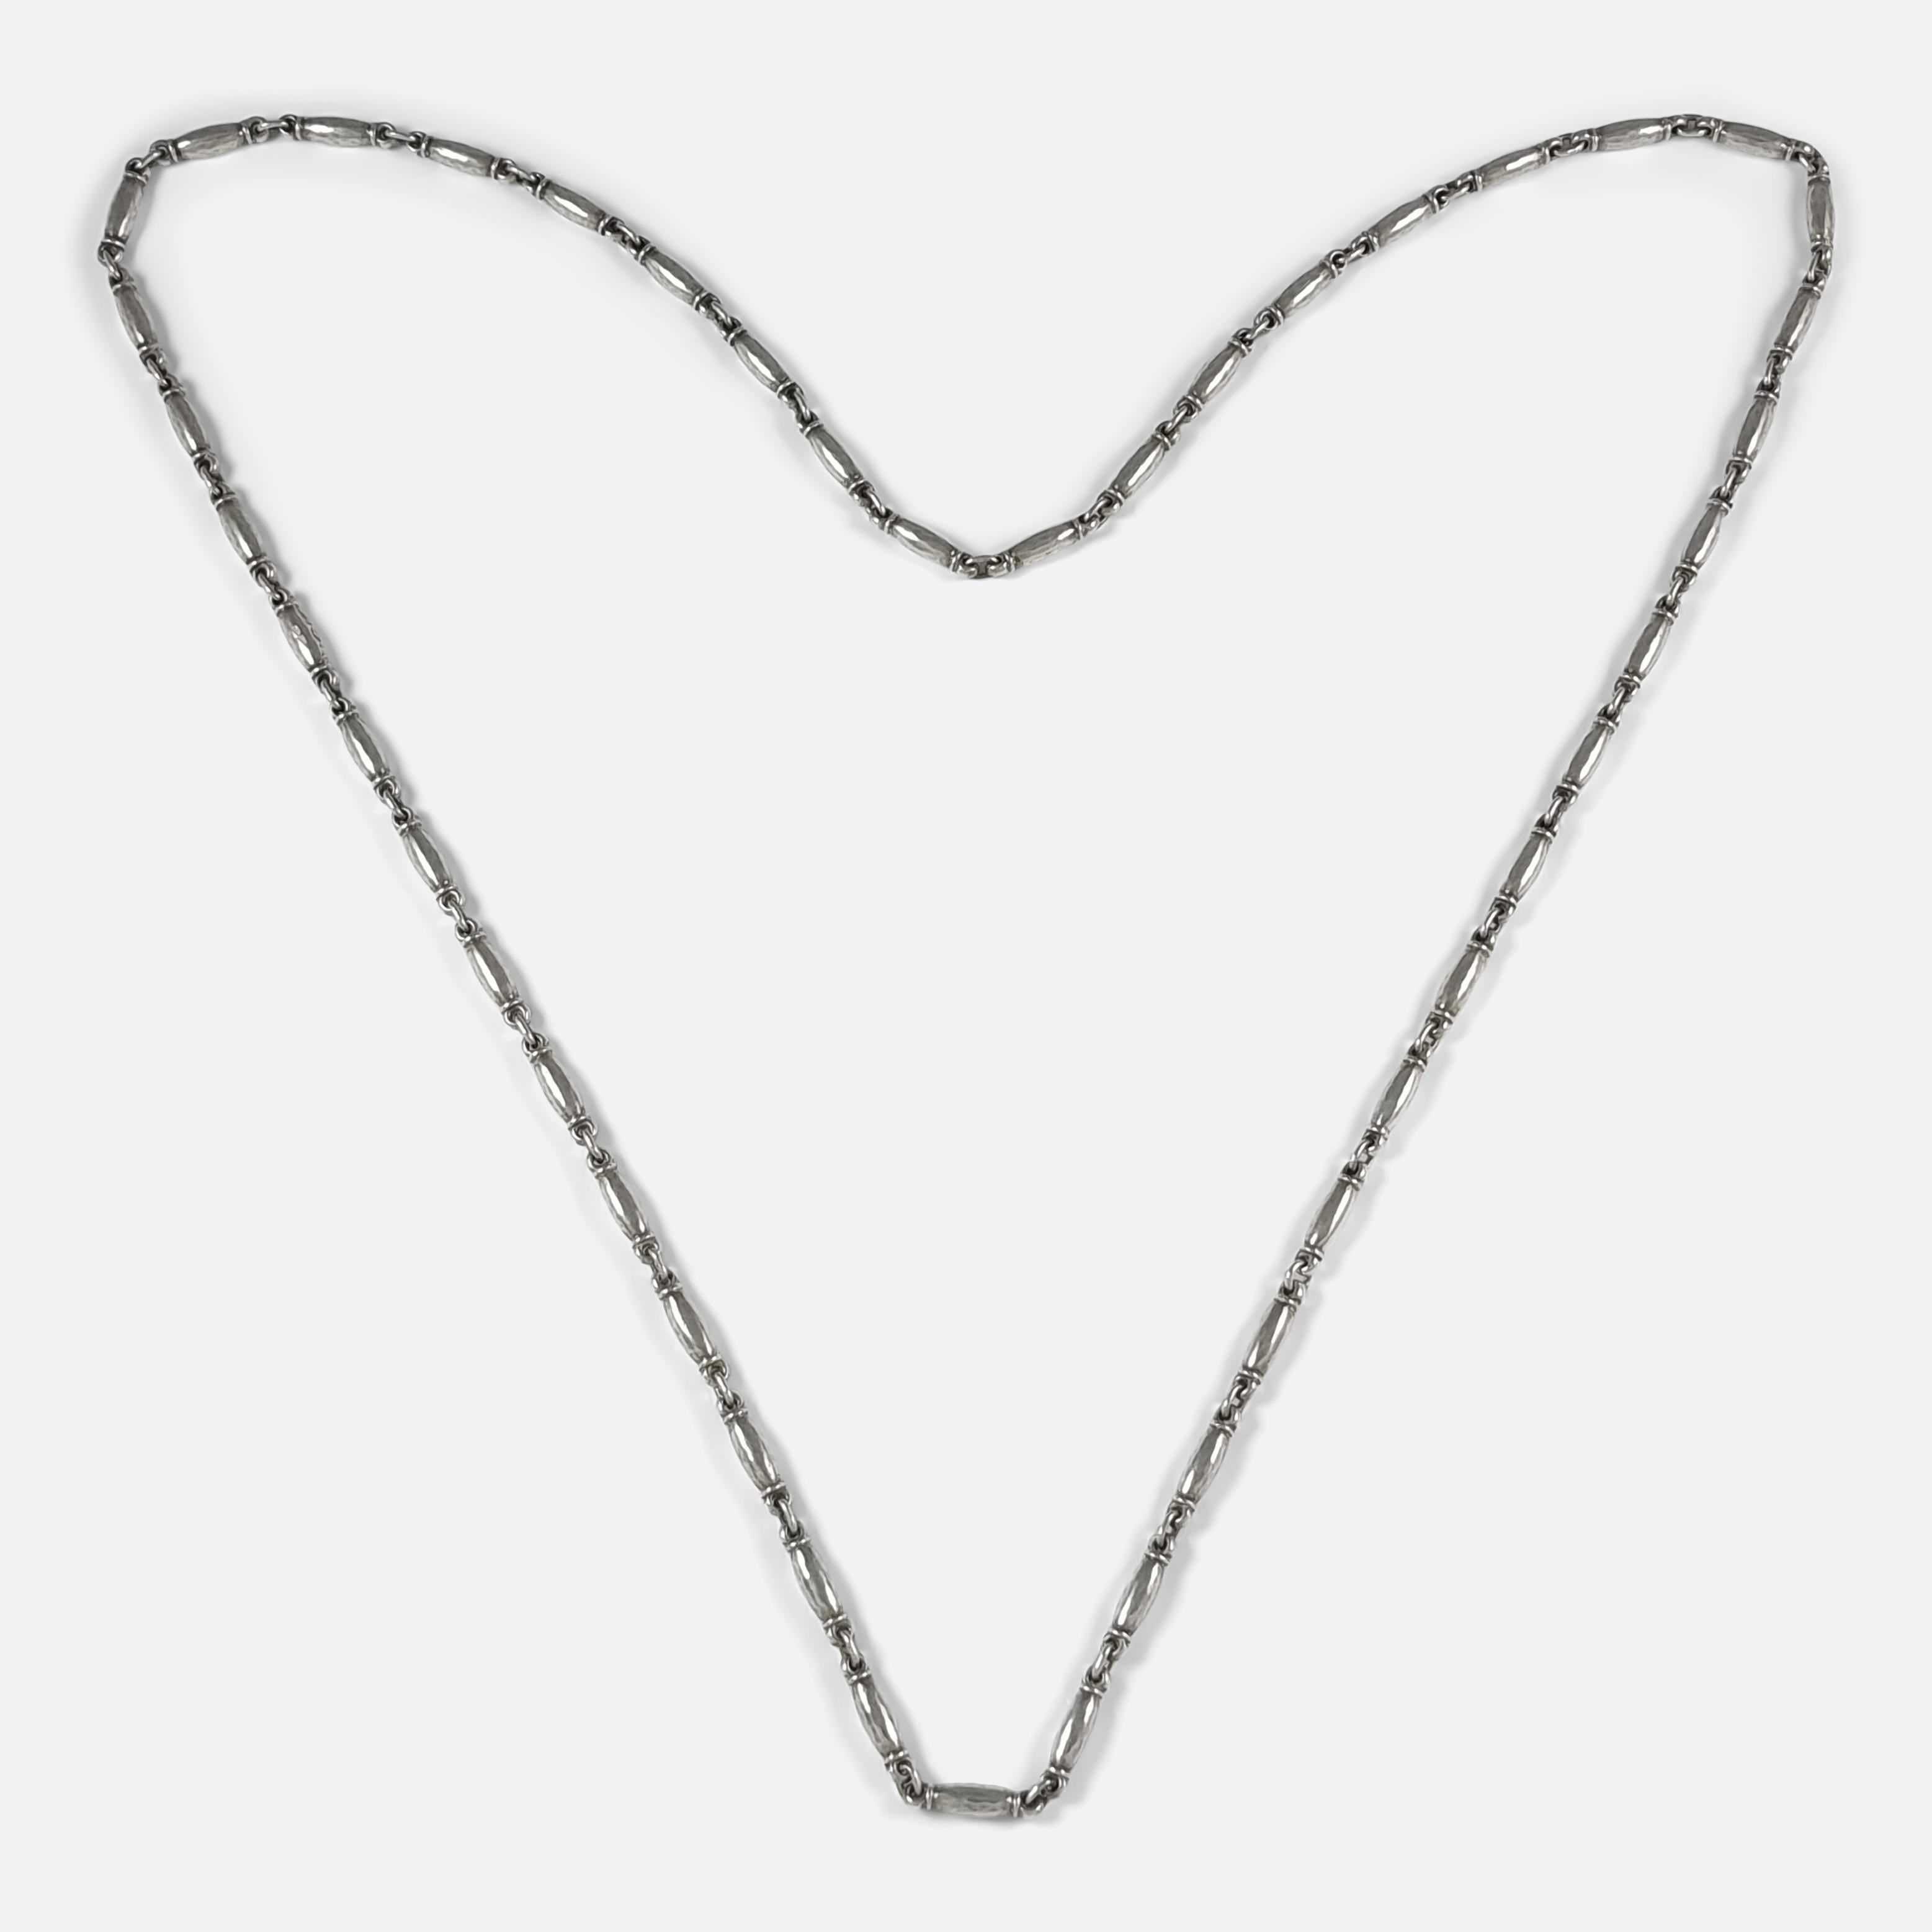 A Danish sterling silver necklace, #40, designed by Henry Pilstrup for Georg Jensen. 

The necklace is stamped with the Georg Jensen within a dotted oval marking (used since 1945), 